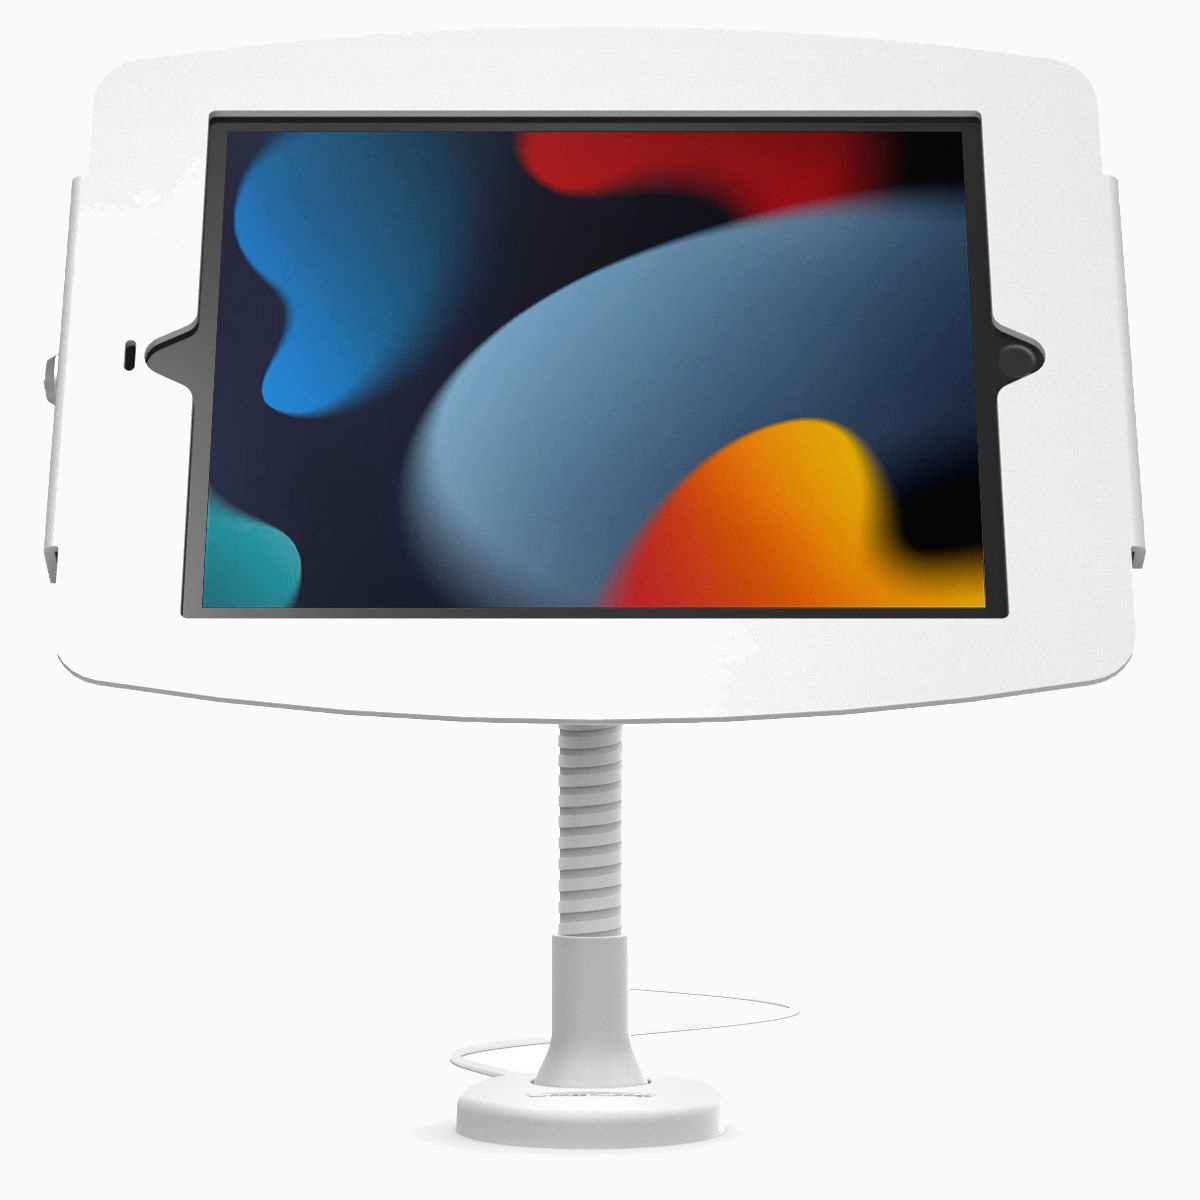 Tablet & iPad Desk Stand Kiosk with Adjustable Viewing Angle